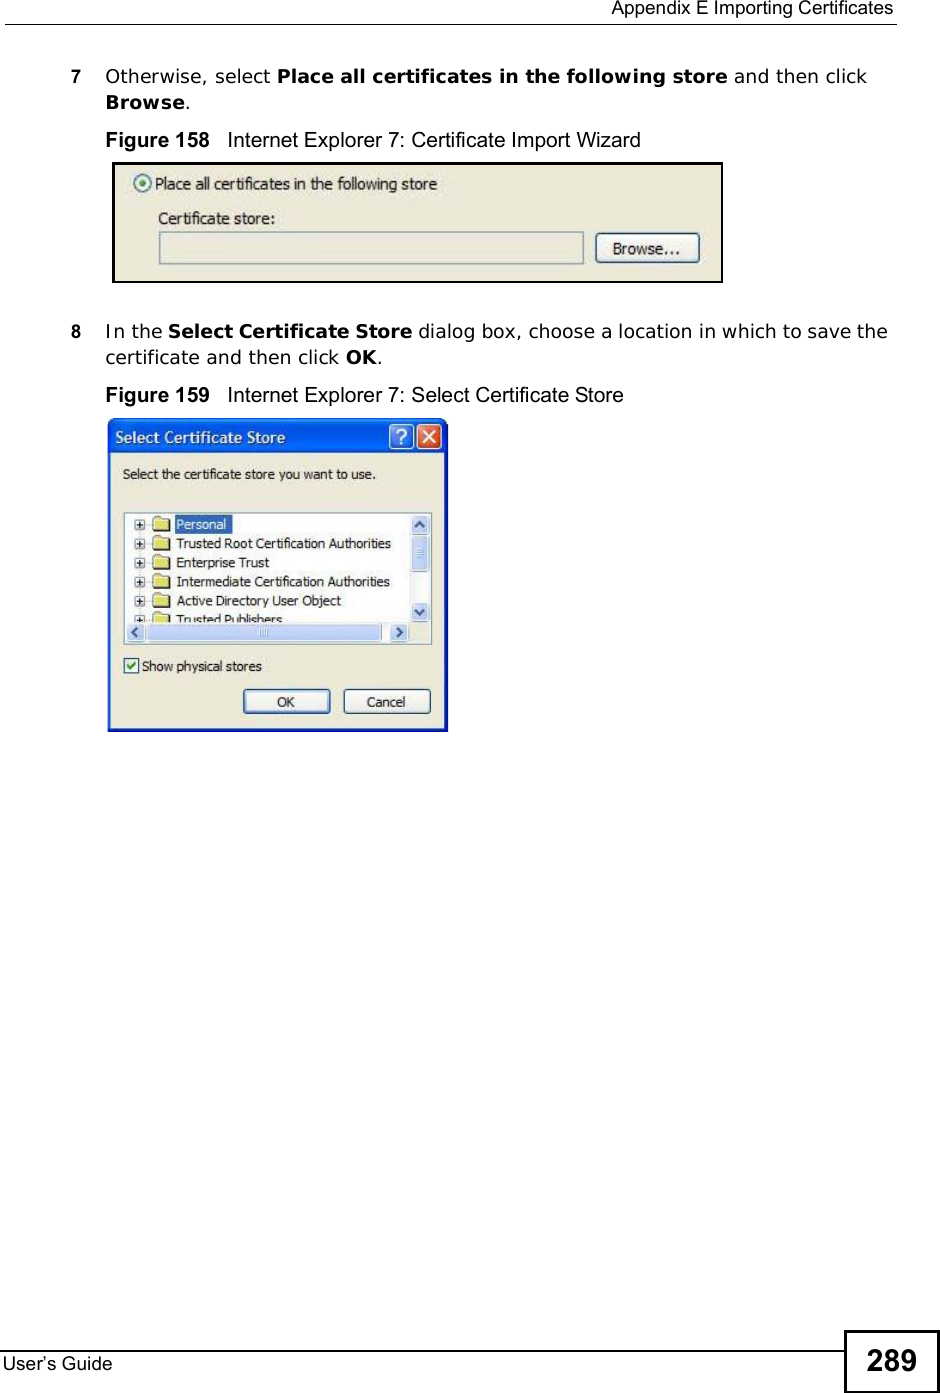  Appendix EImporting CertificatesUser s Guide 2897Otherwise, select Place all certificates in the following store and then click Browse.Figure 158   Internet Explorer 7: Certificate Import Wizard8In the Select Certificate Store dialog box, choose a location in which to save the certificate and then click OK.Figure 159   Internet Explorer 7: Select Certificate Store